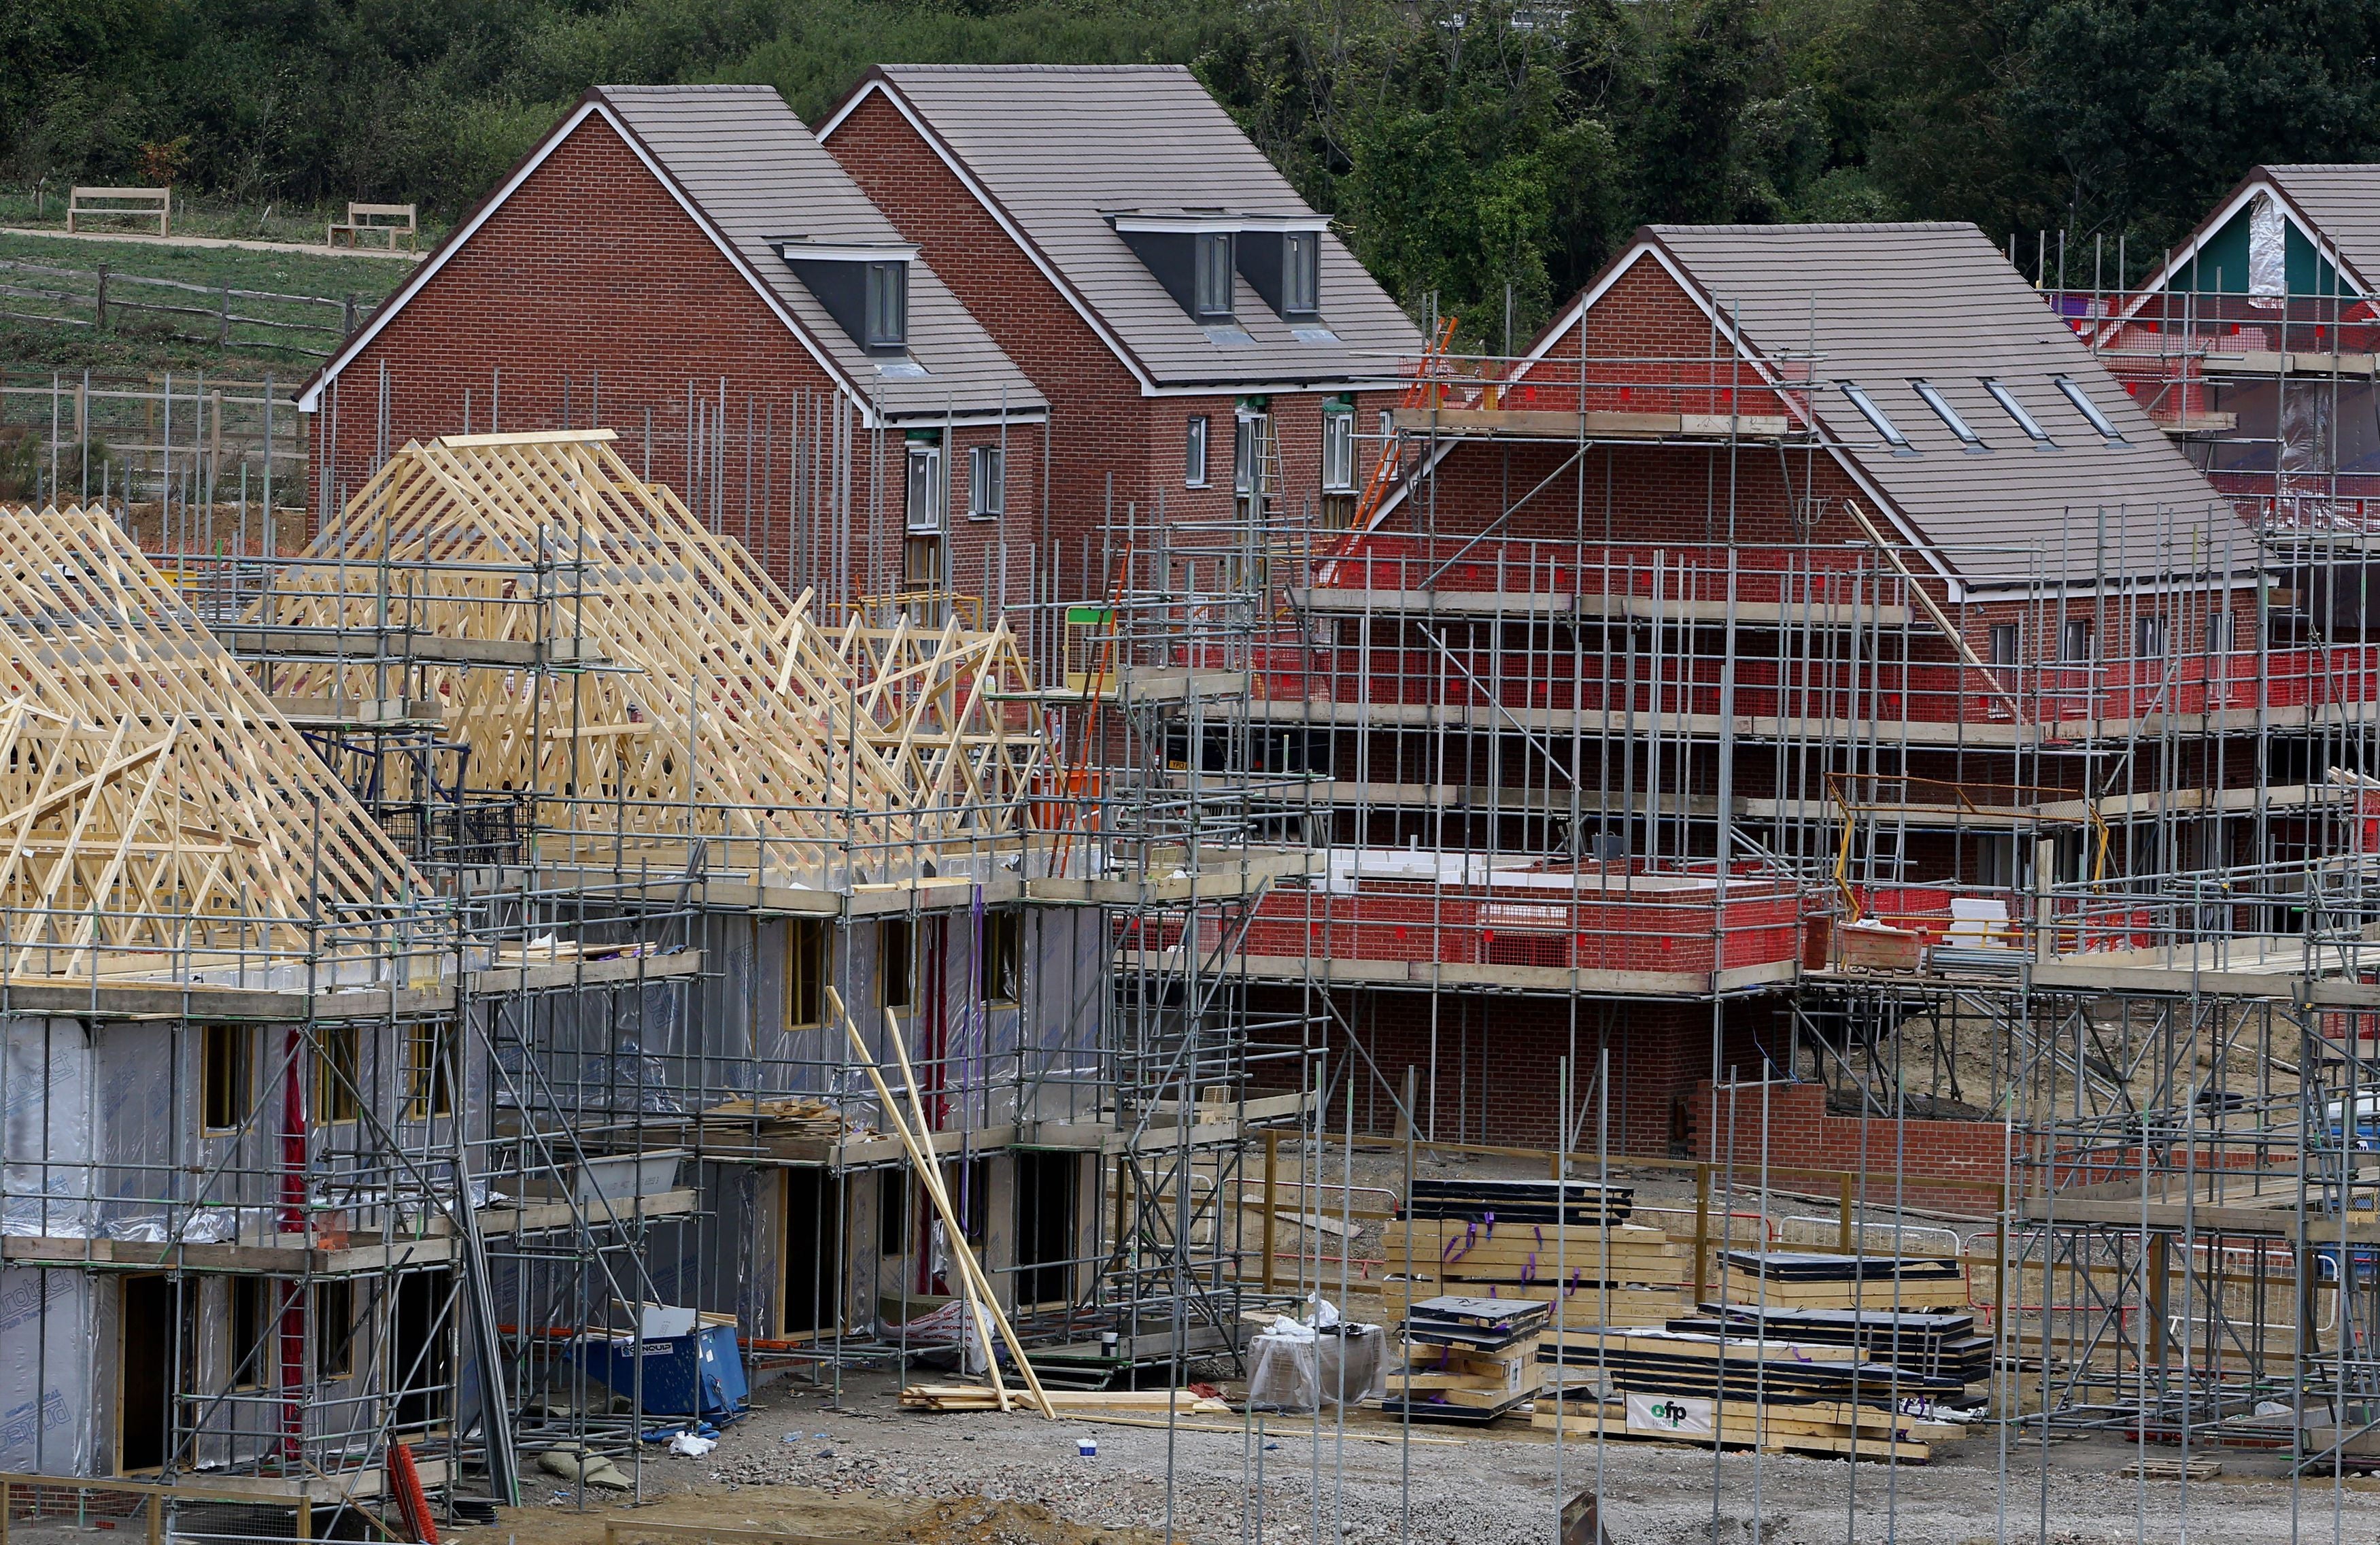 Enough land for 1.3 million houses on brownfield sites, charity says